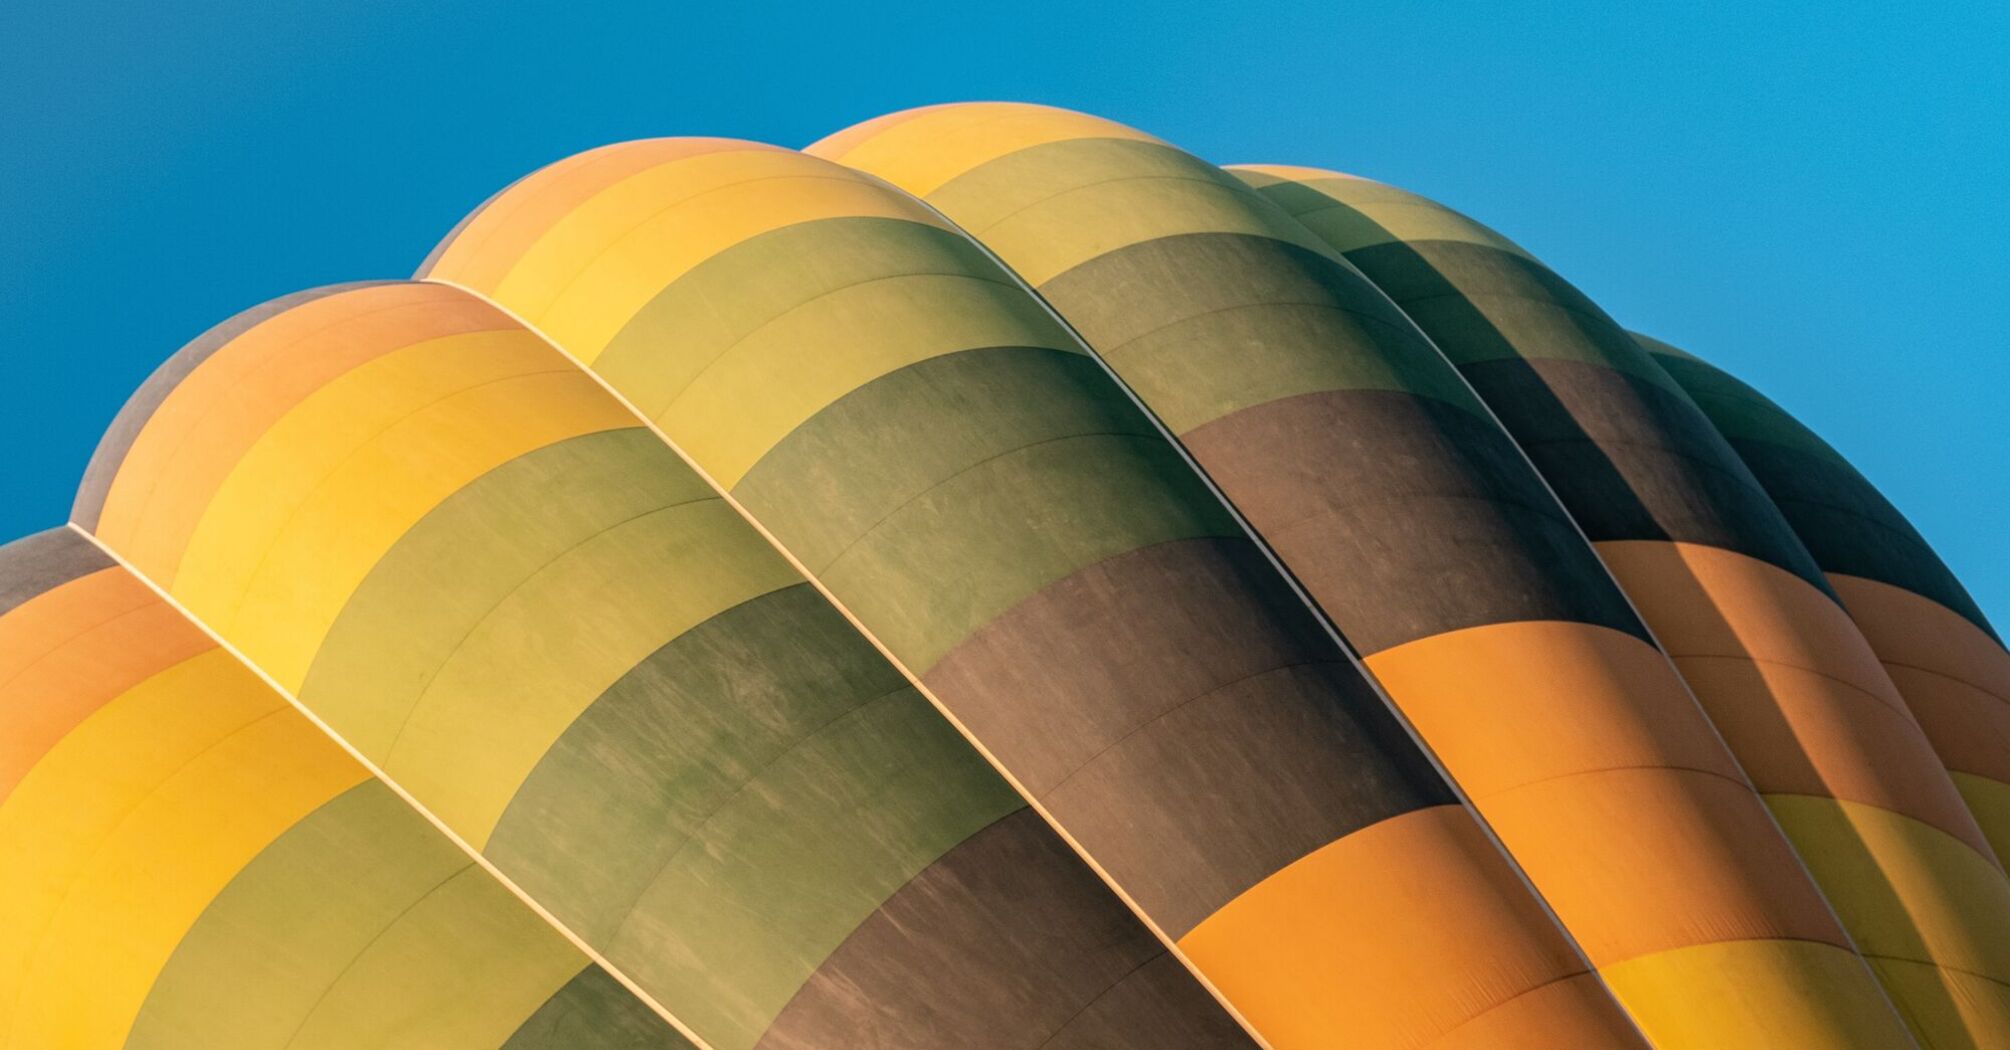 Beautiful yet dangerous: what risks can occur during a hot air balloon flight